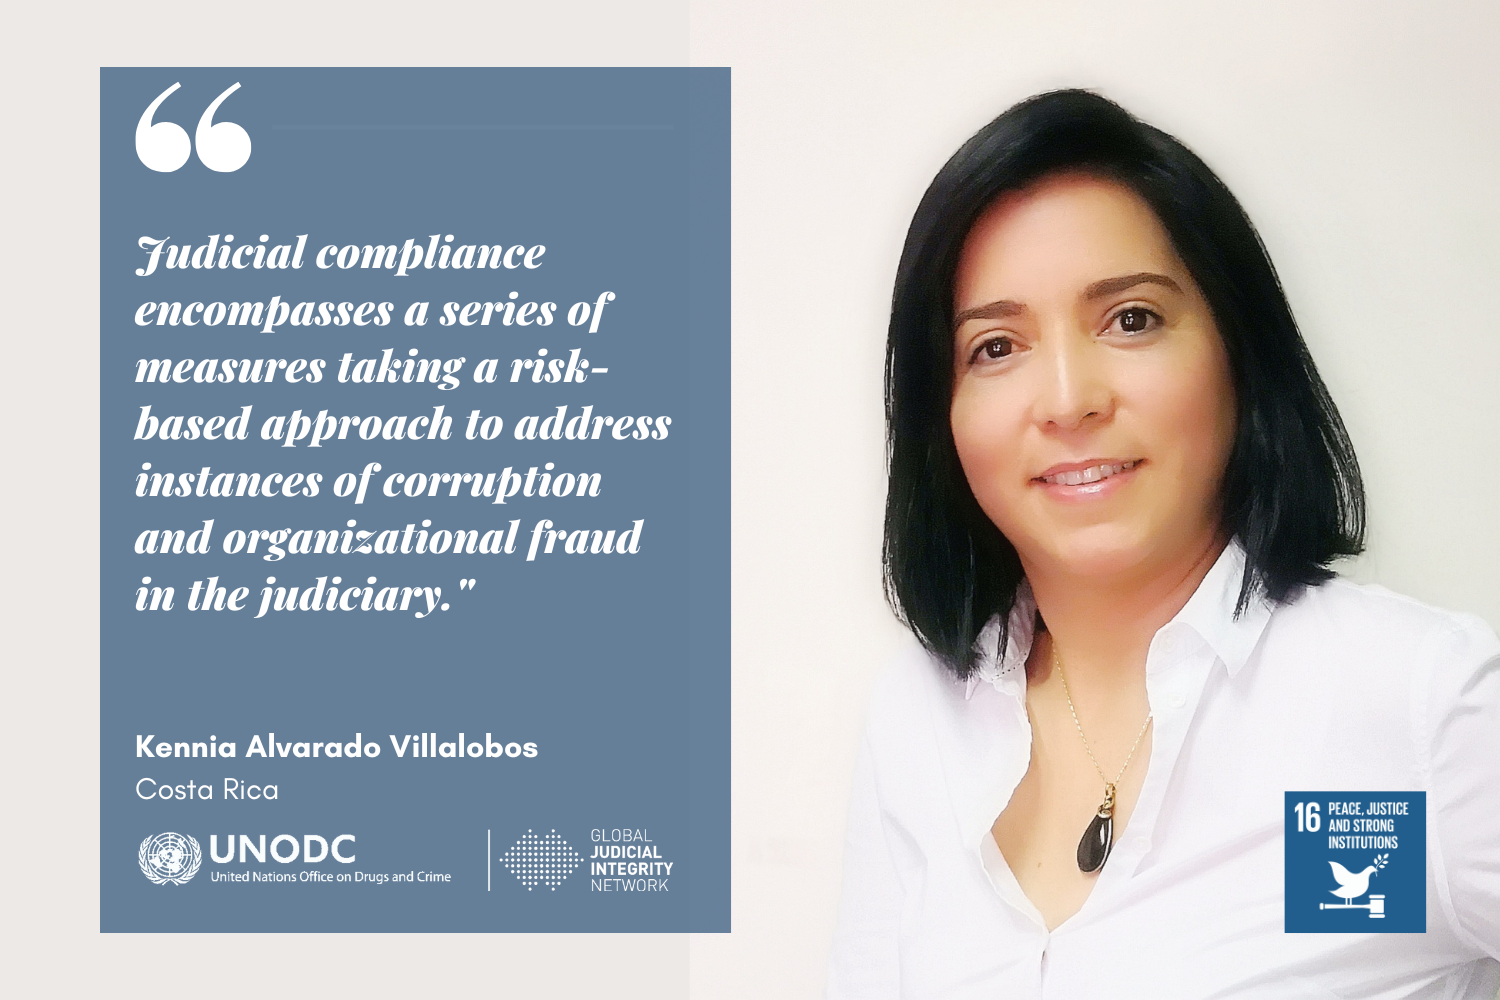 Judicial Compliance: A governance model for managing the risk of corruption and ensuring the quality and integrity of the judiciary